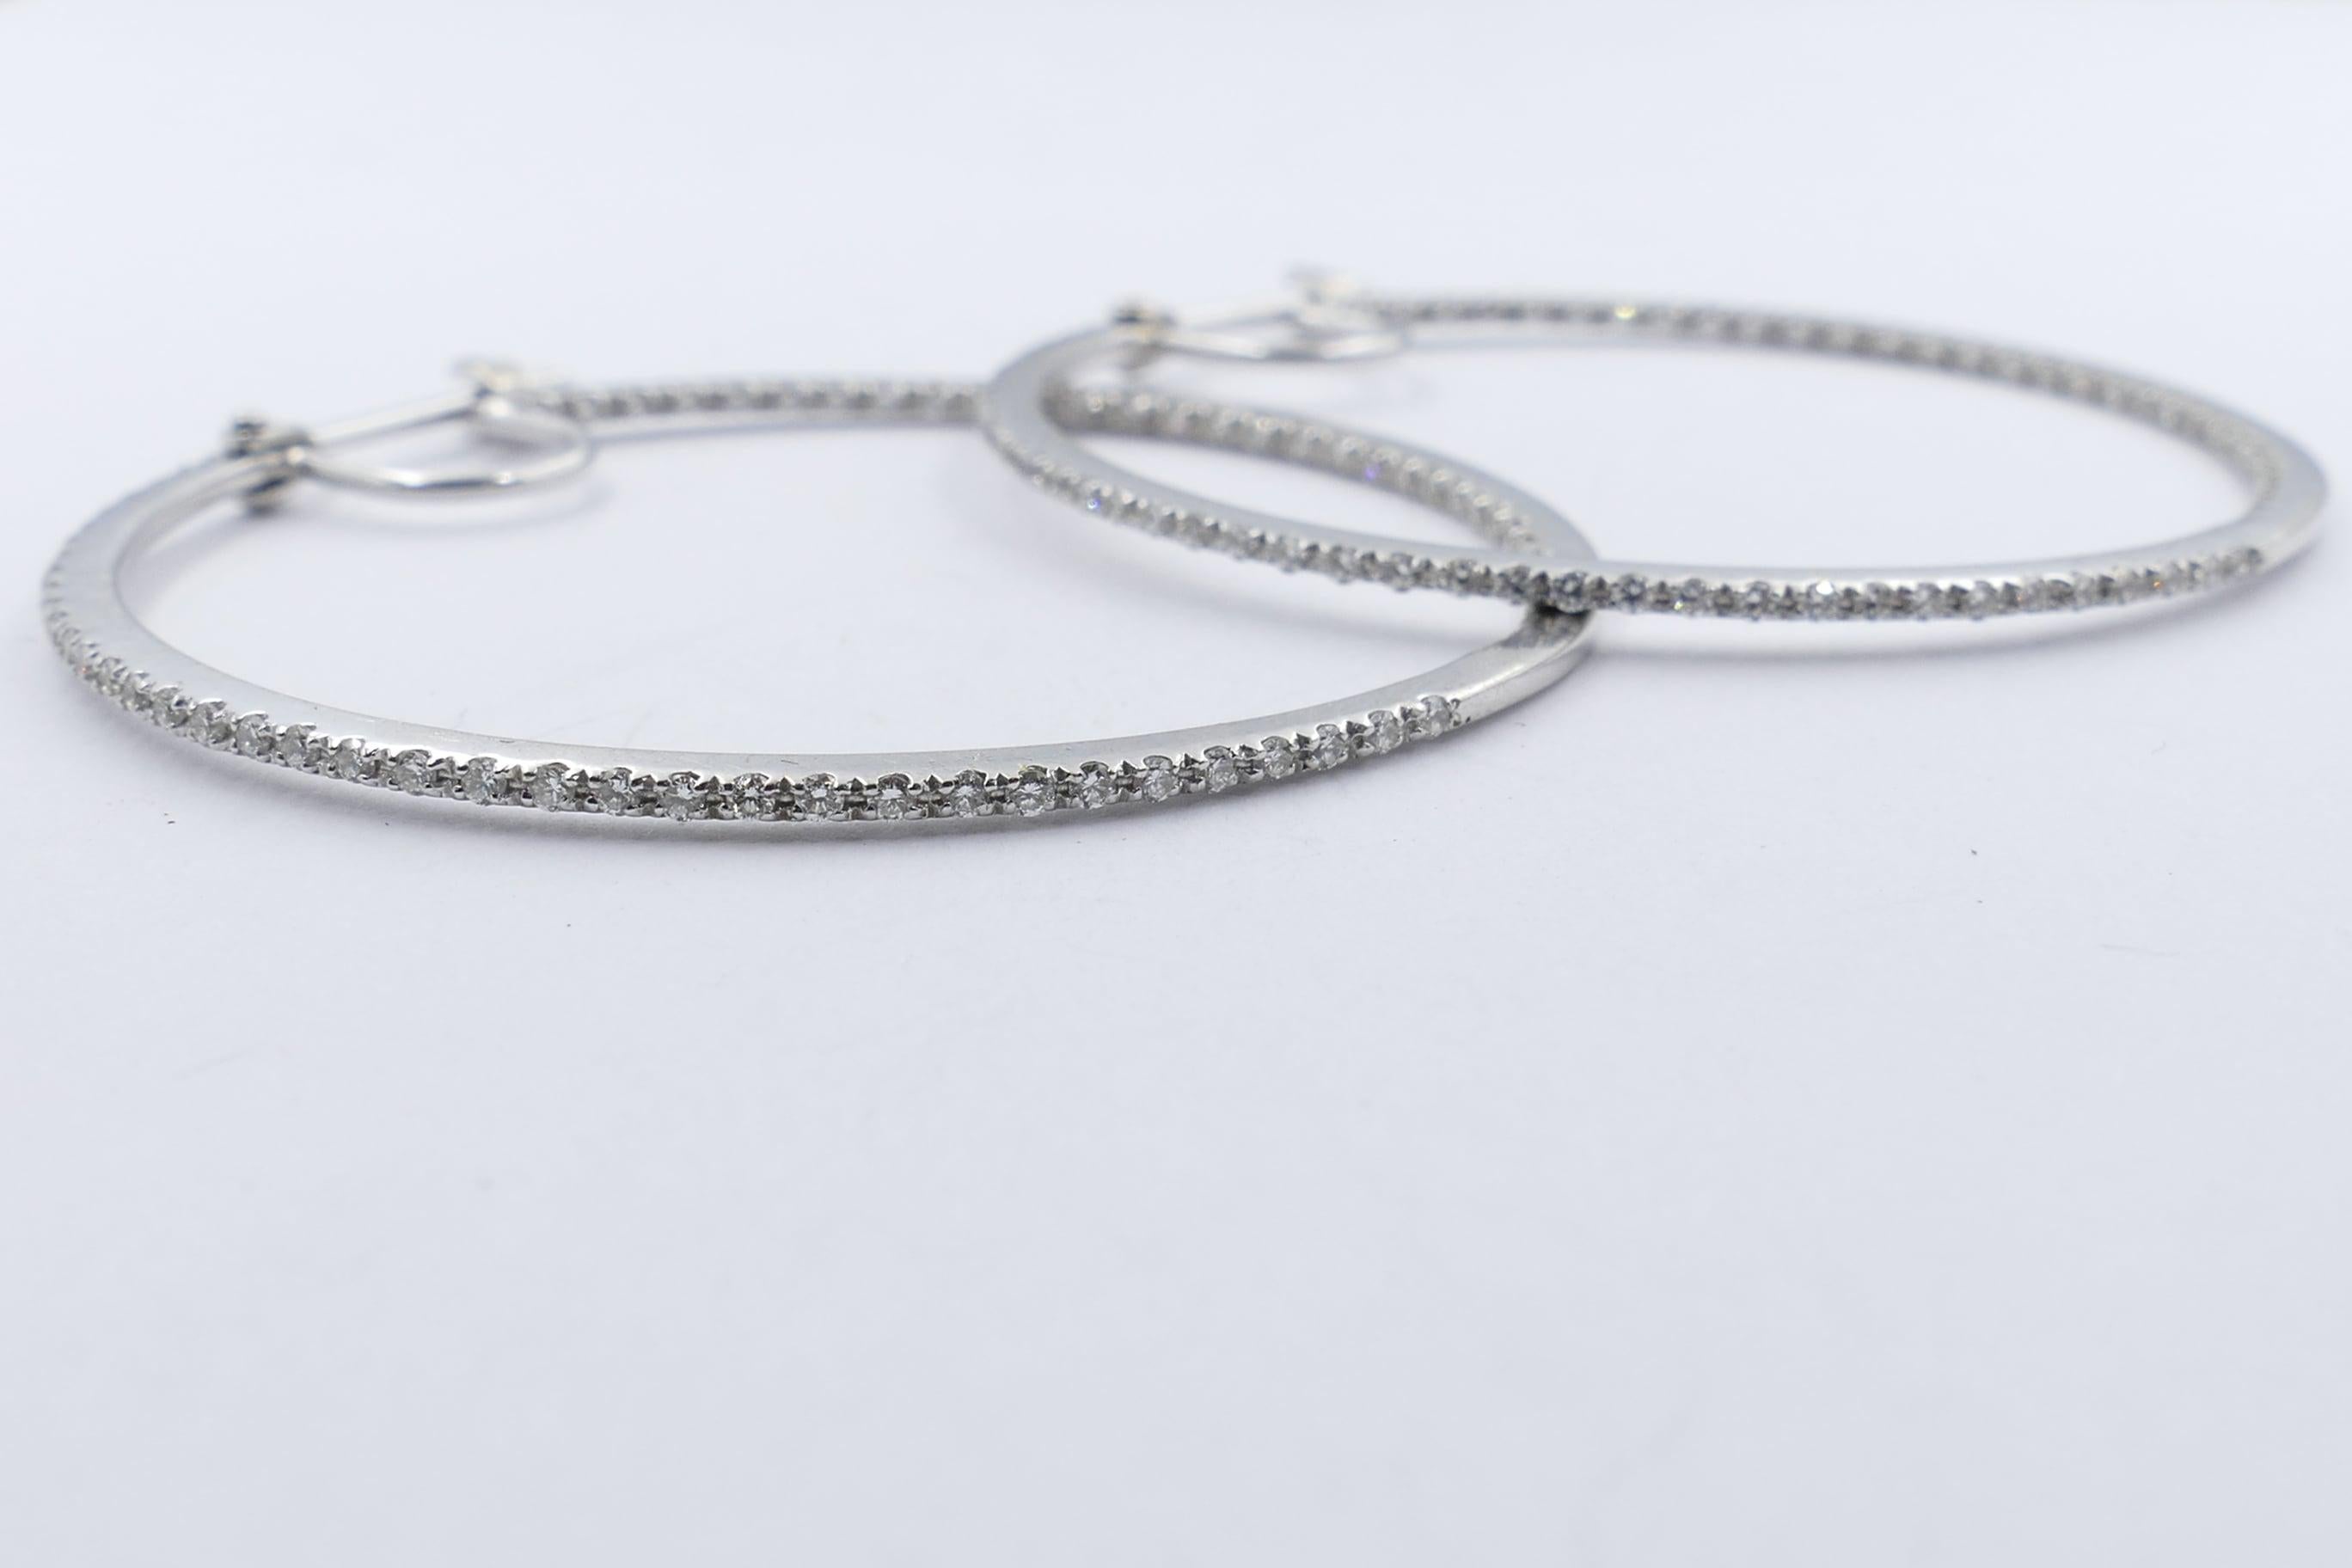 Purchased in London & set in 9ct White Gold these largeish Hoops would complement any outfit. Not at all heavy to look at but give a lovely sparkle.
There are 152 round brilliant cut Diamonds of good colour H/J, clarity SI1-SI2, totalling 3 quarters